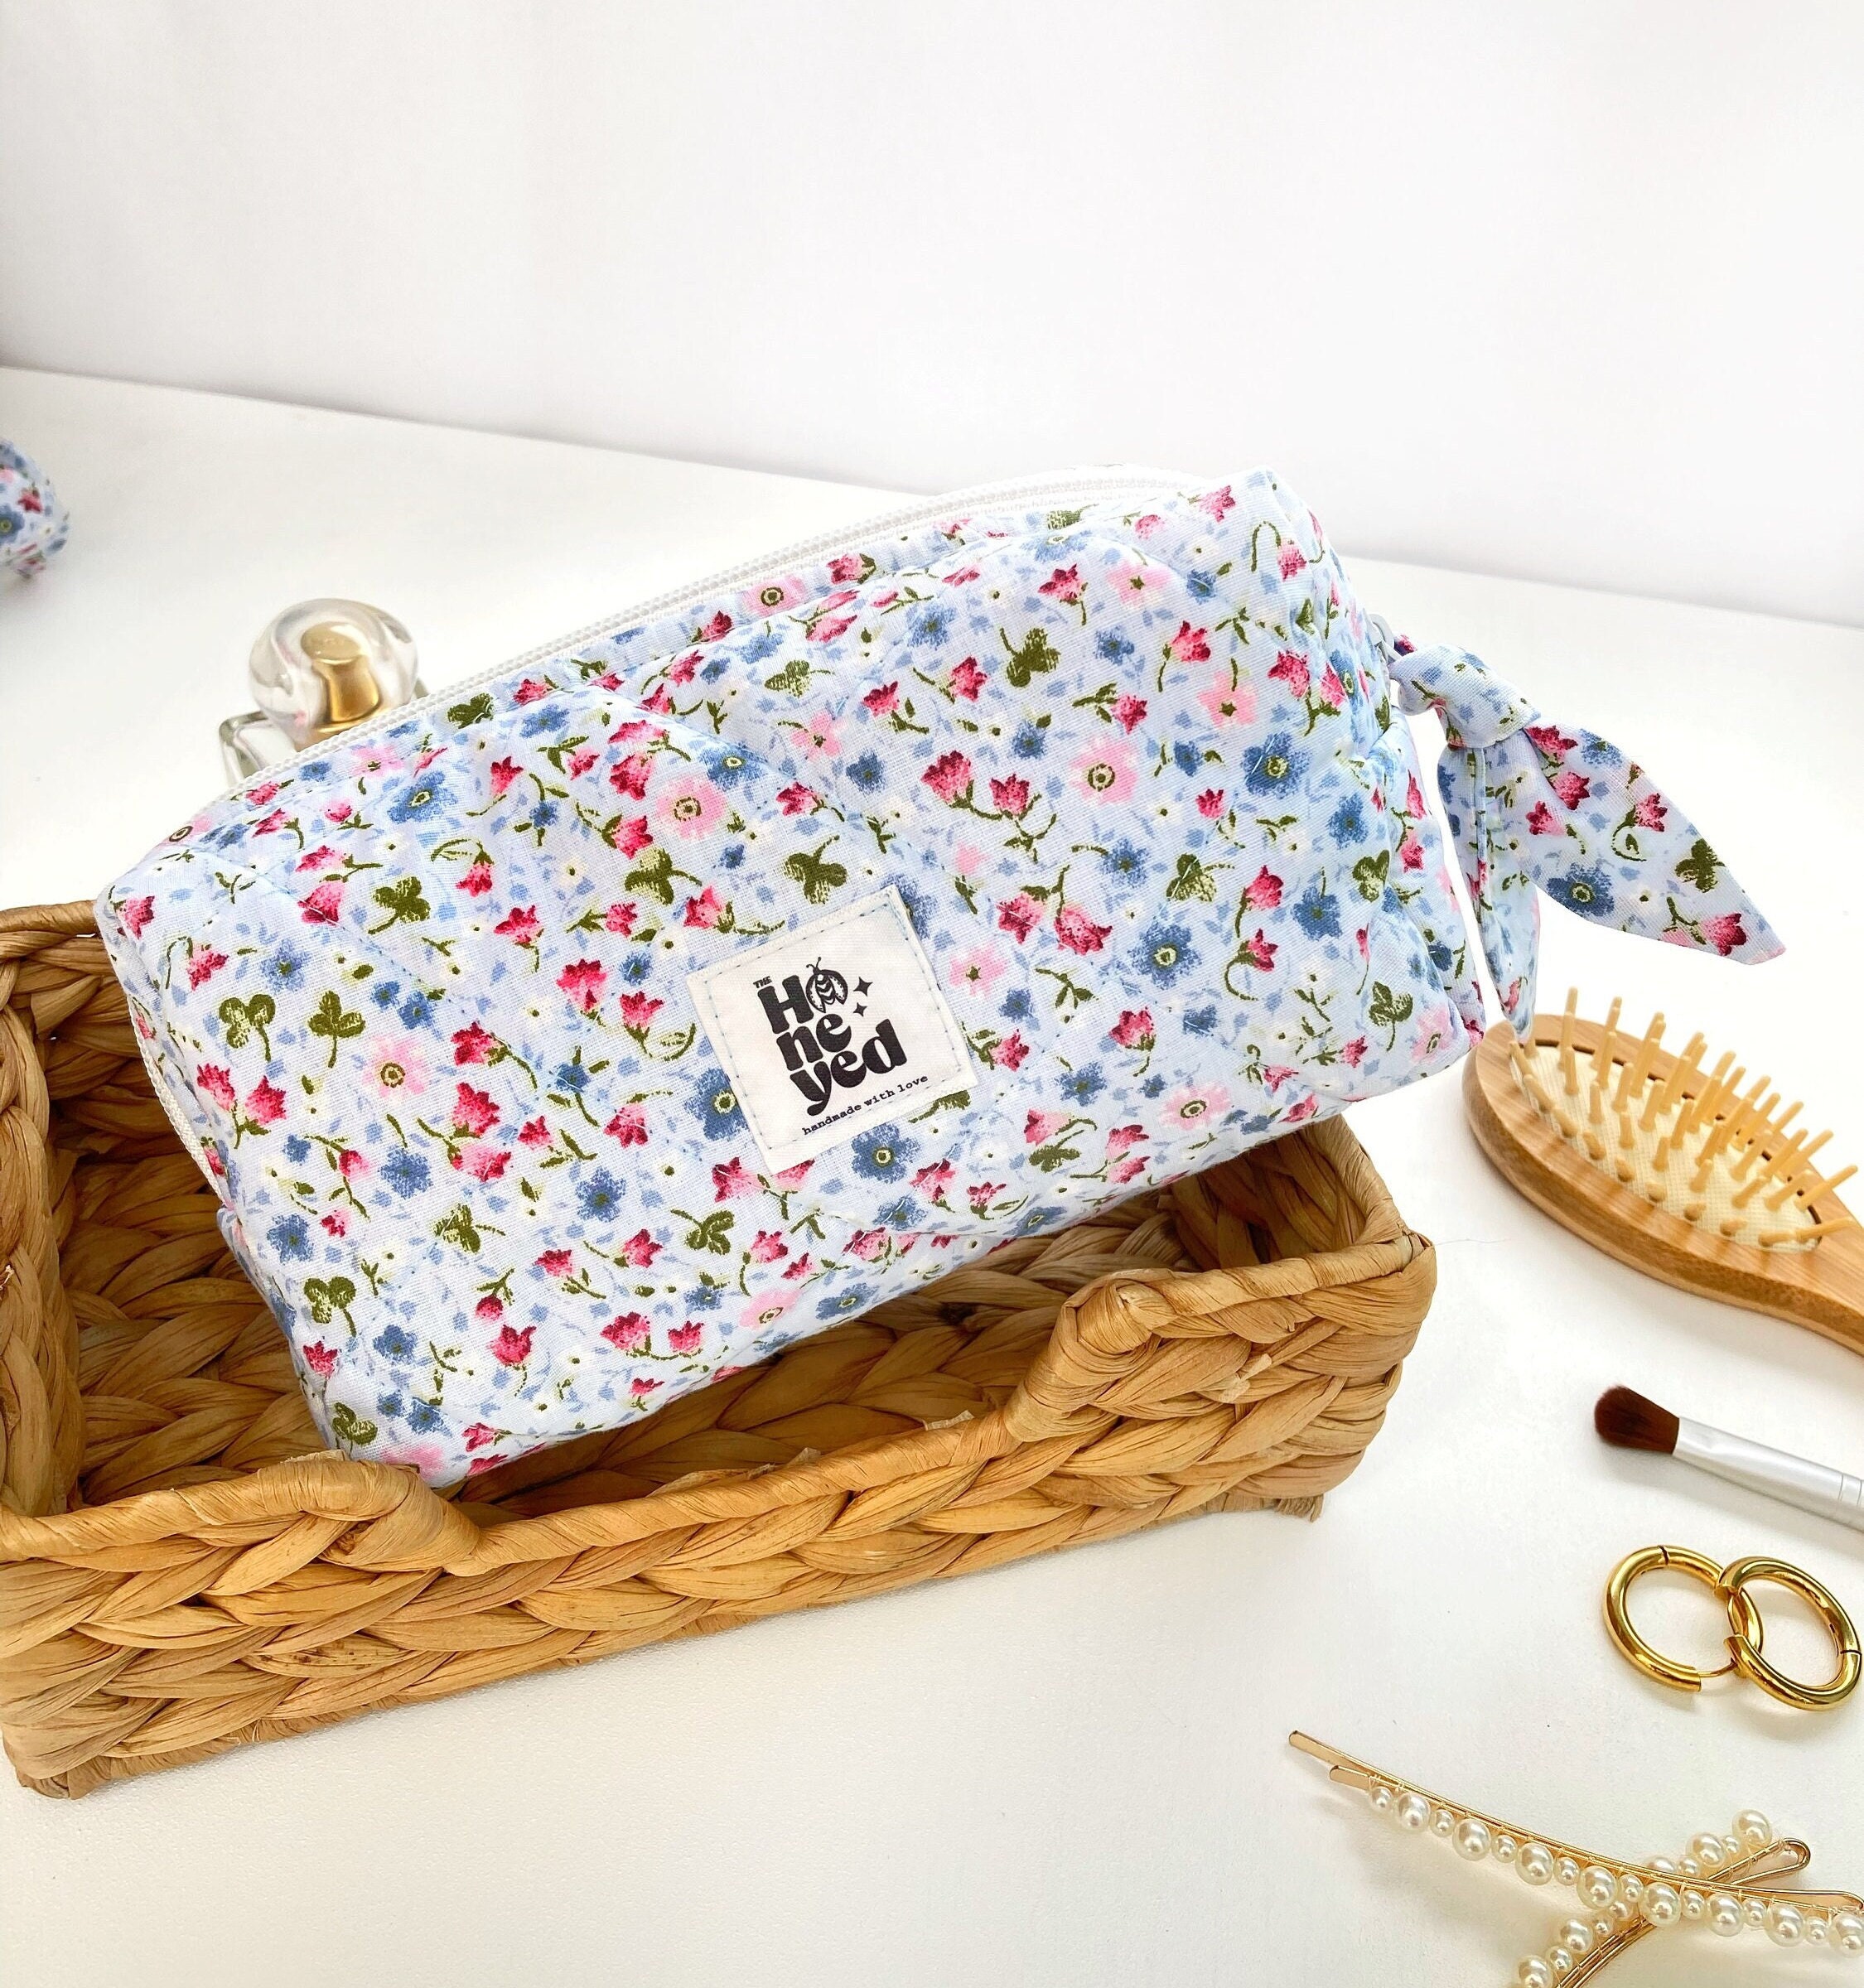 Floral Makeup Bag For Women Large Cotton Fabric Cosmetic Bag Travel Toilet  Beauty Case Necesserie Storage Organizer Pouch Clutch